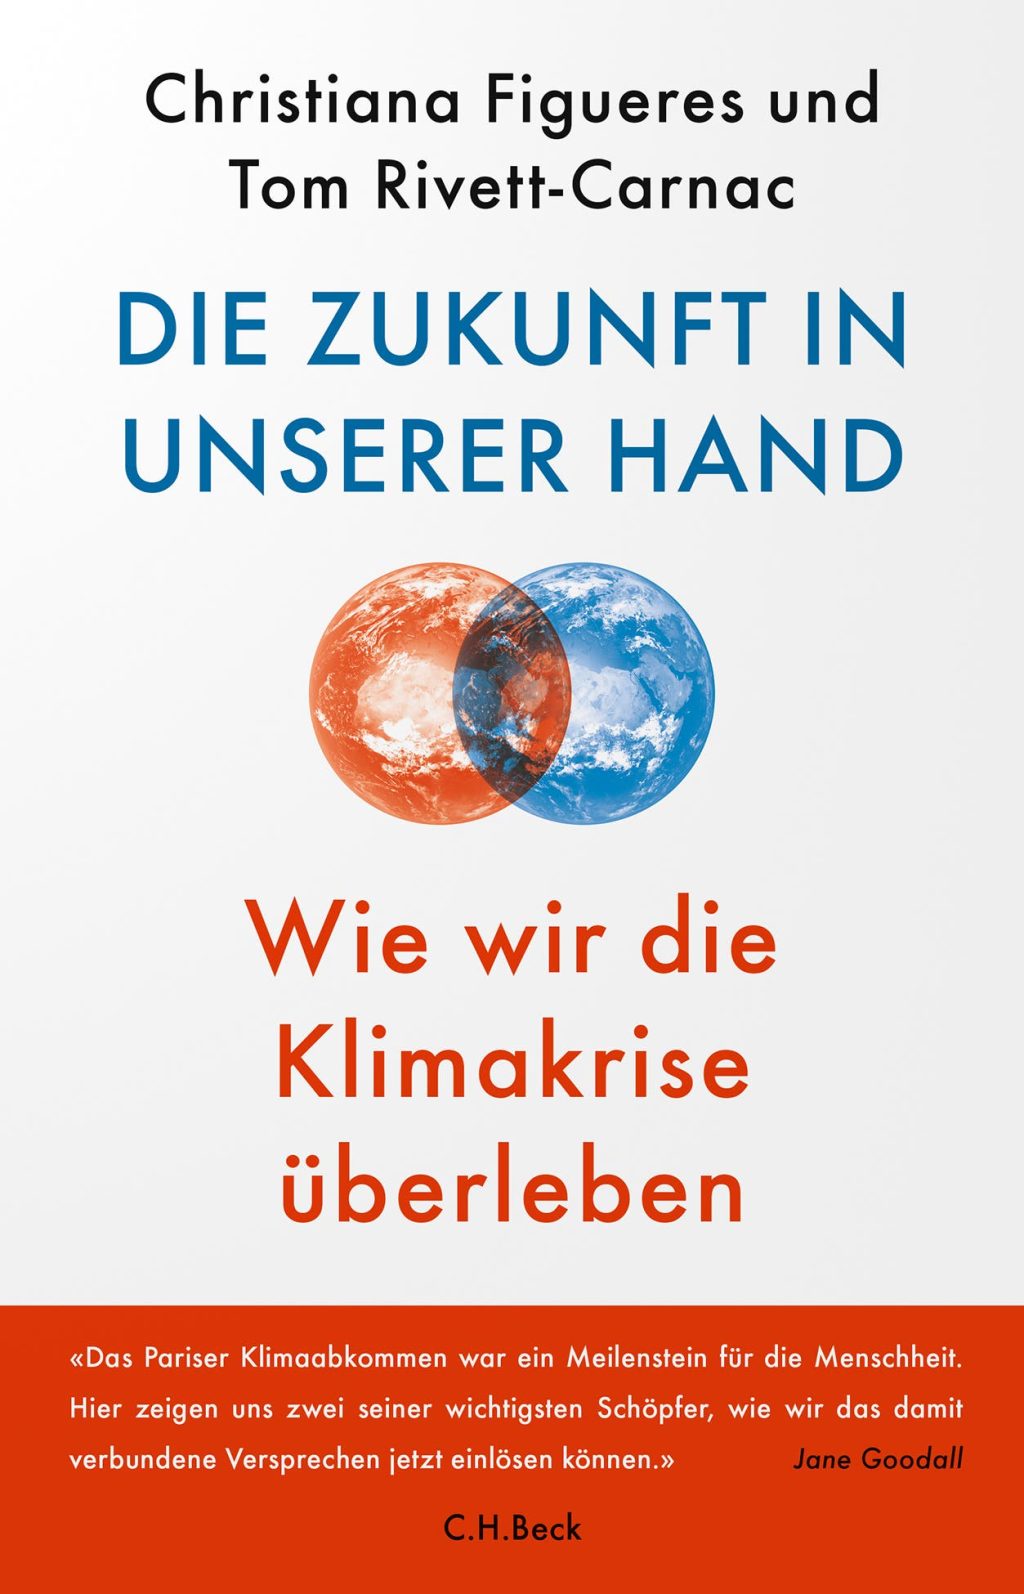 Review of the book "The future is in our hands"